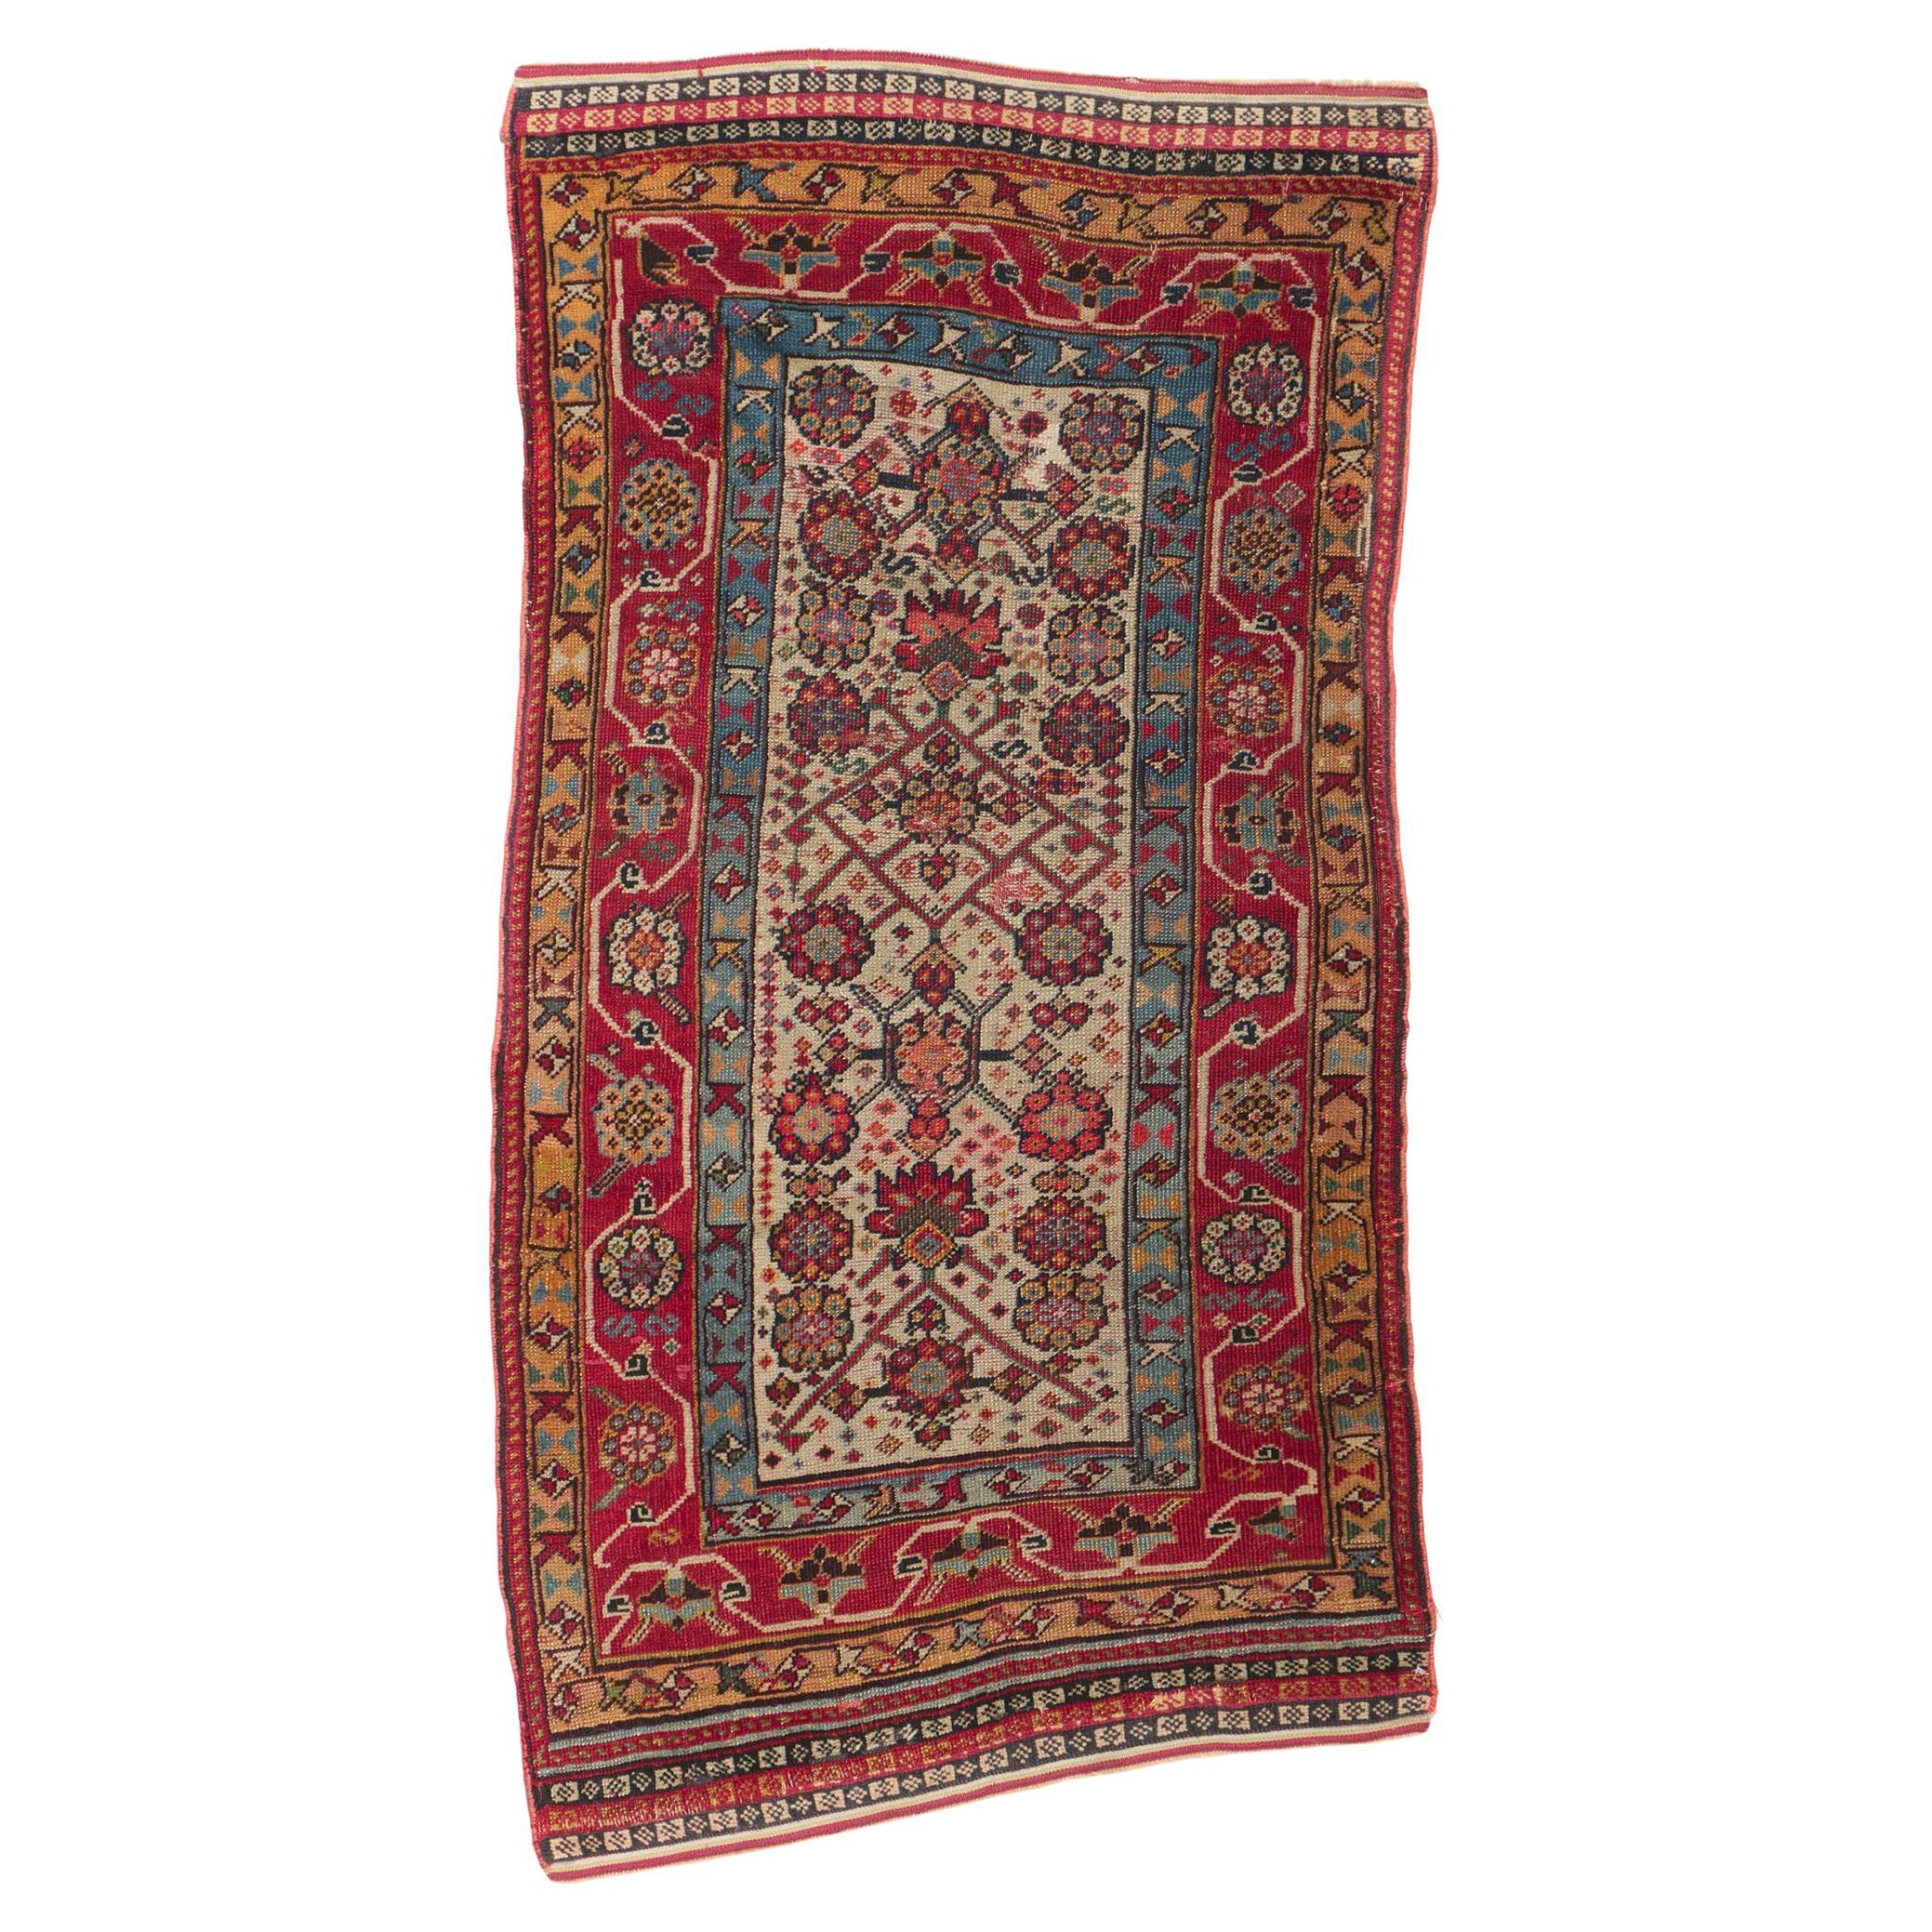 Late 19th Century Antique Persian Gashghaie Rug